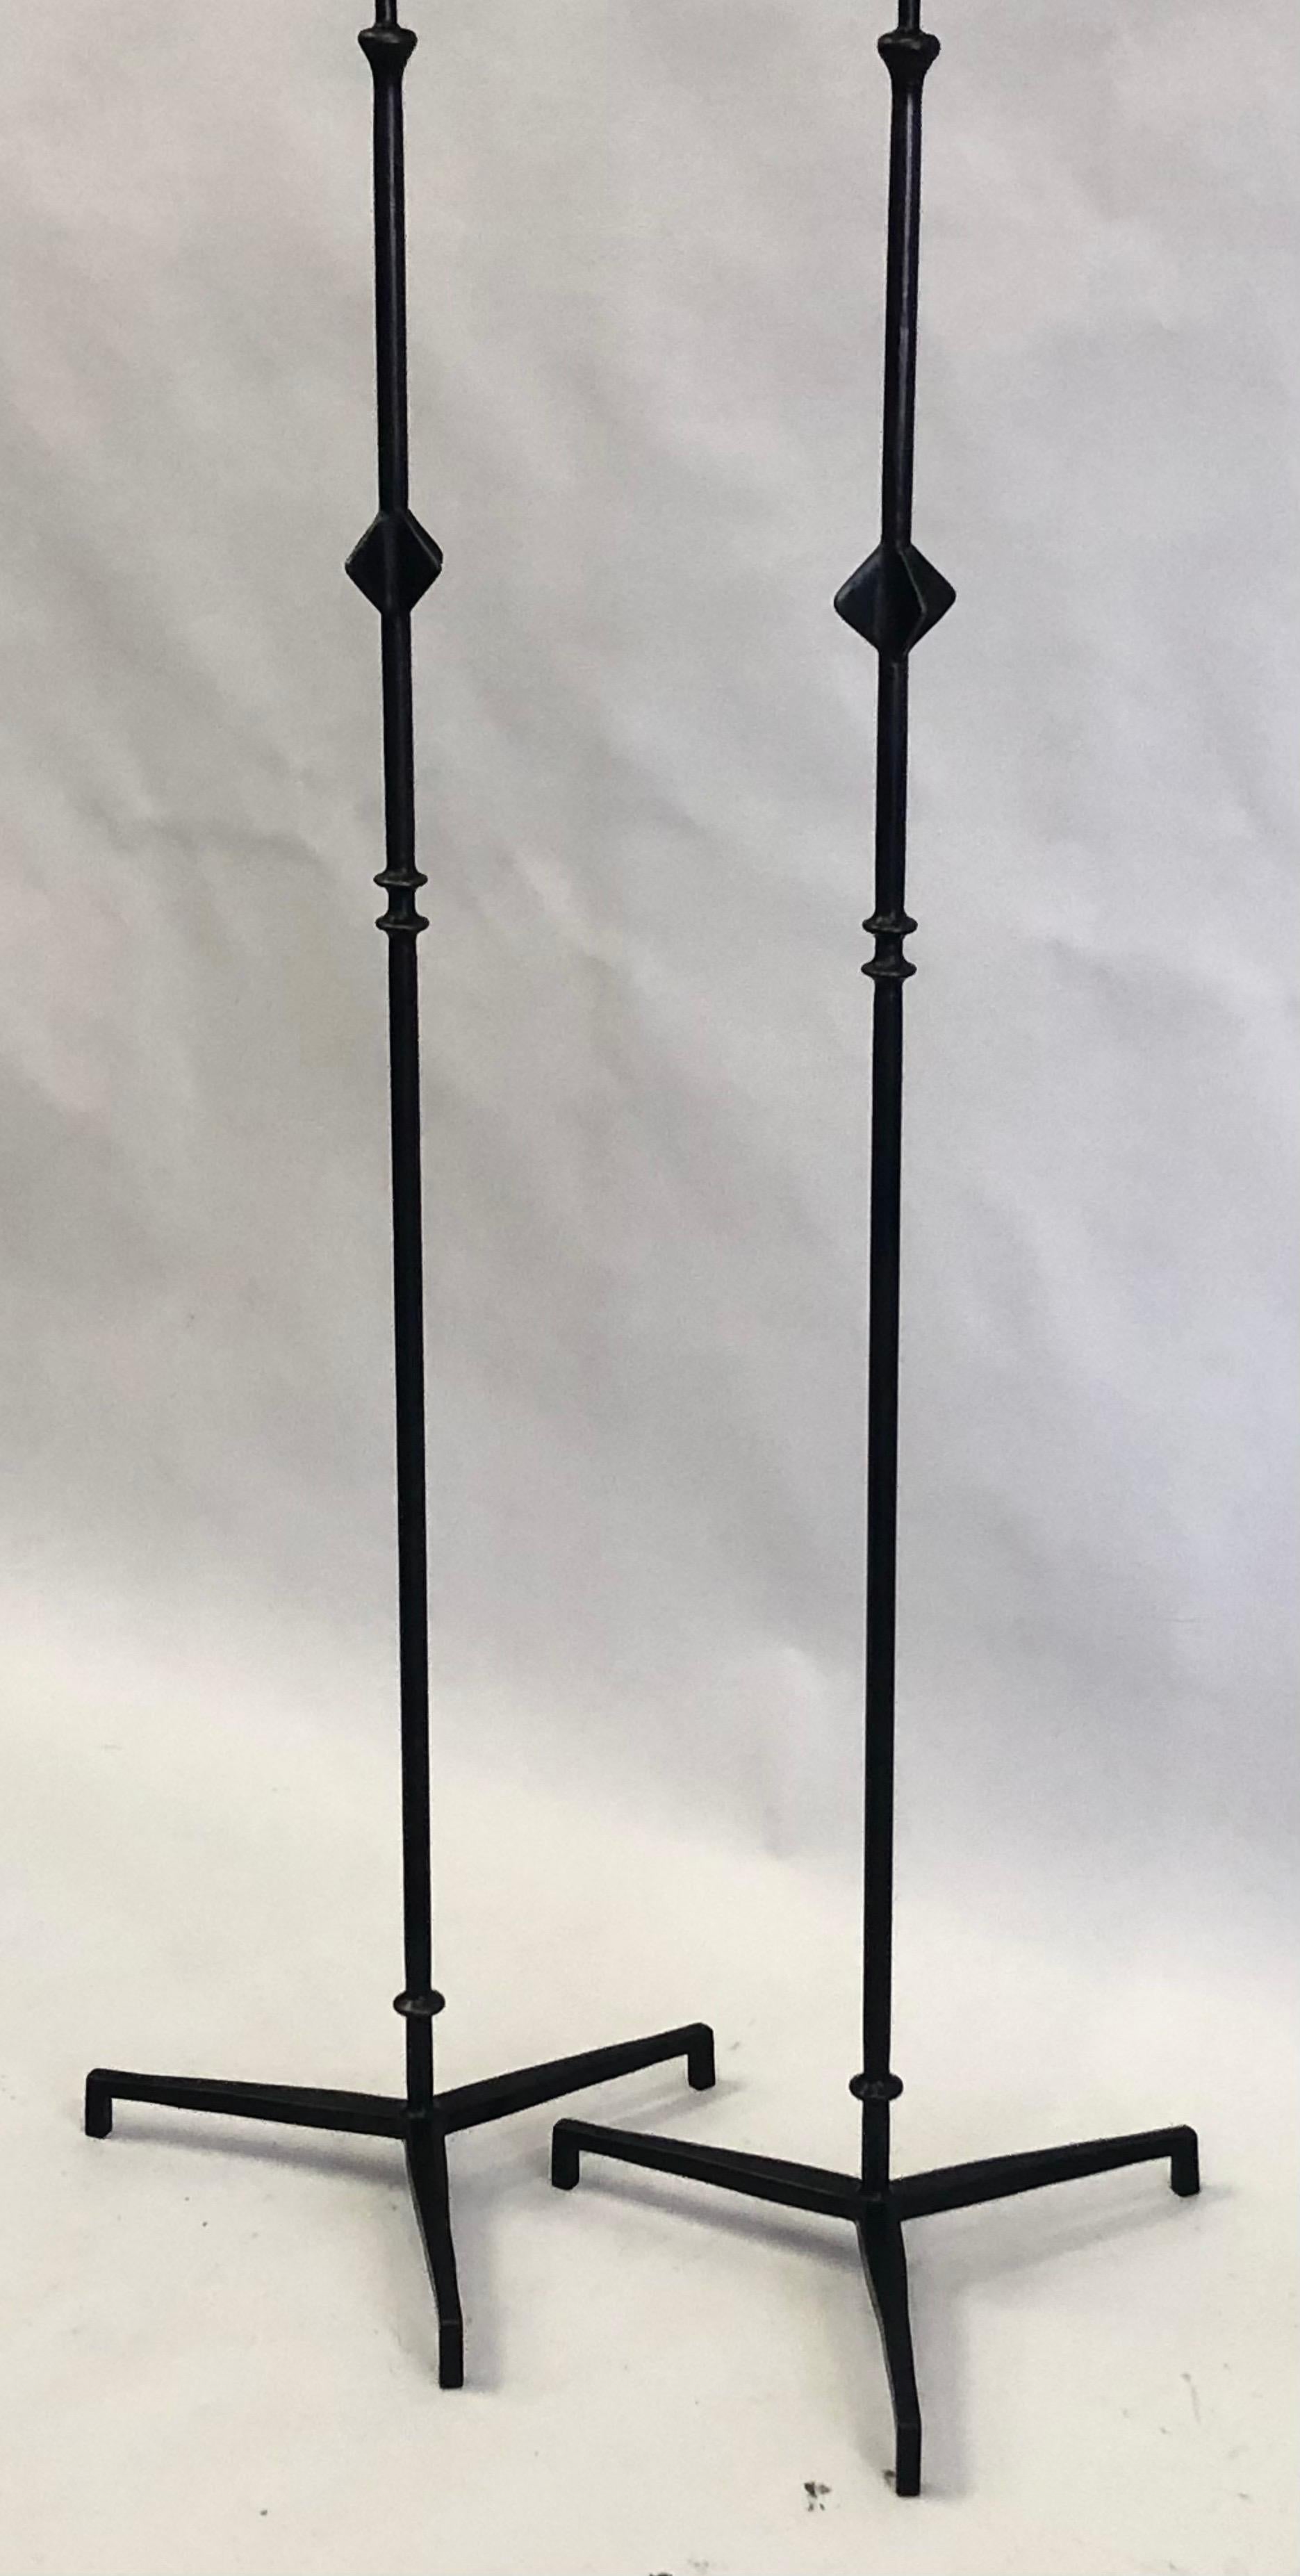 A timeless pair of French Mid-Century Modern neoclassical style hand forged iron floor lamps decorated with the form of a star, after Alberto & Diego Giacometti. These custom pieces are elegant, modern, ancient and poetic, all in the same breath.